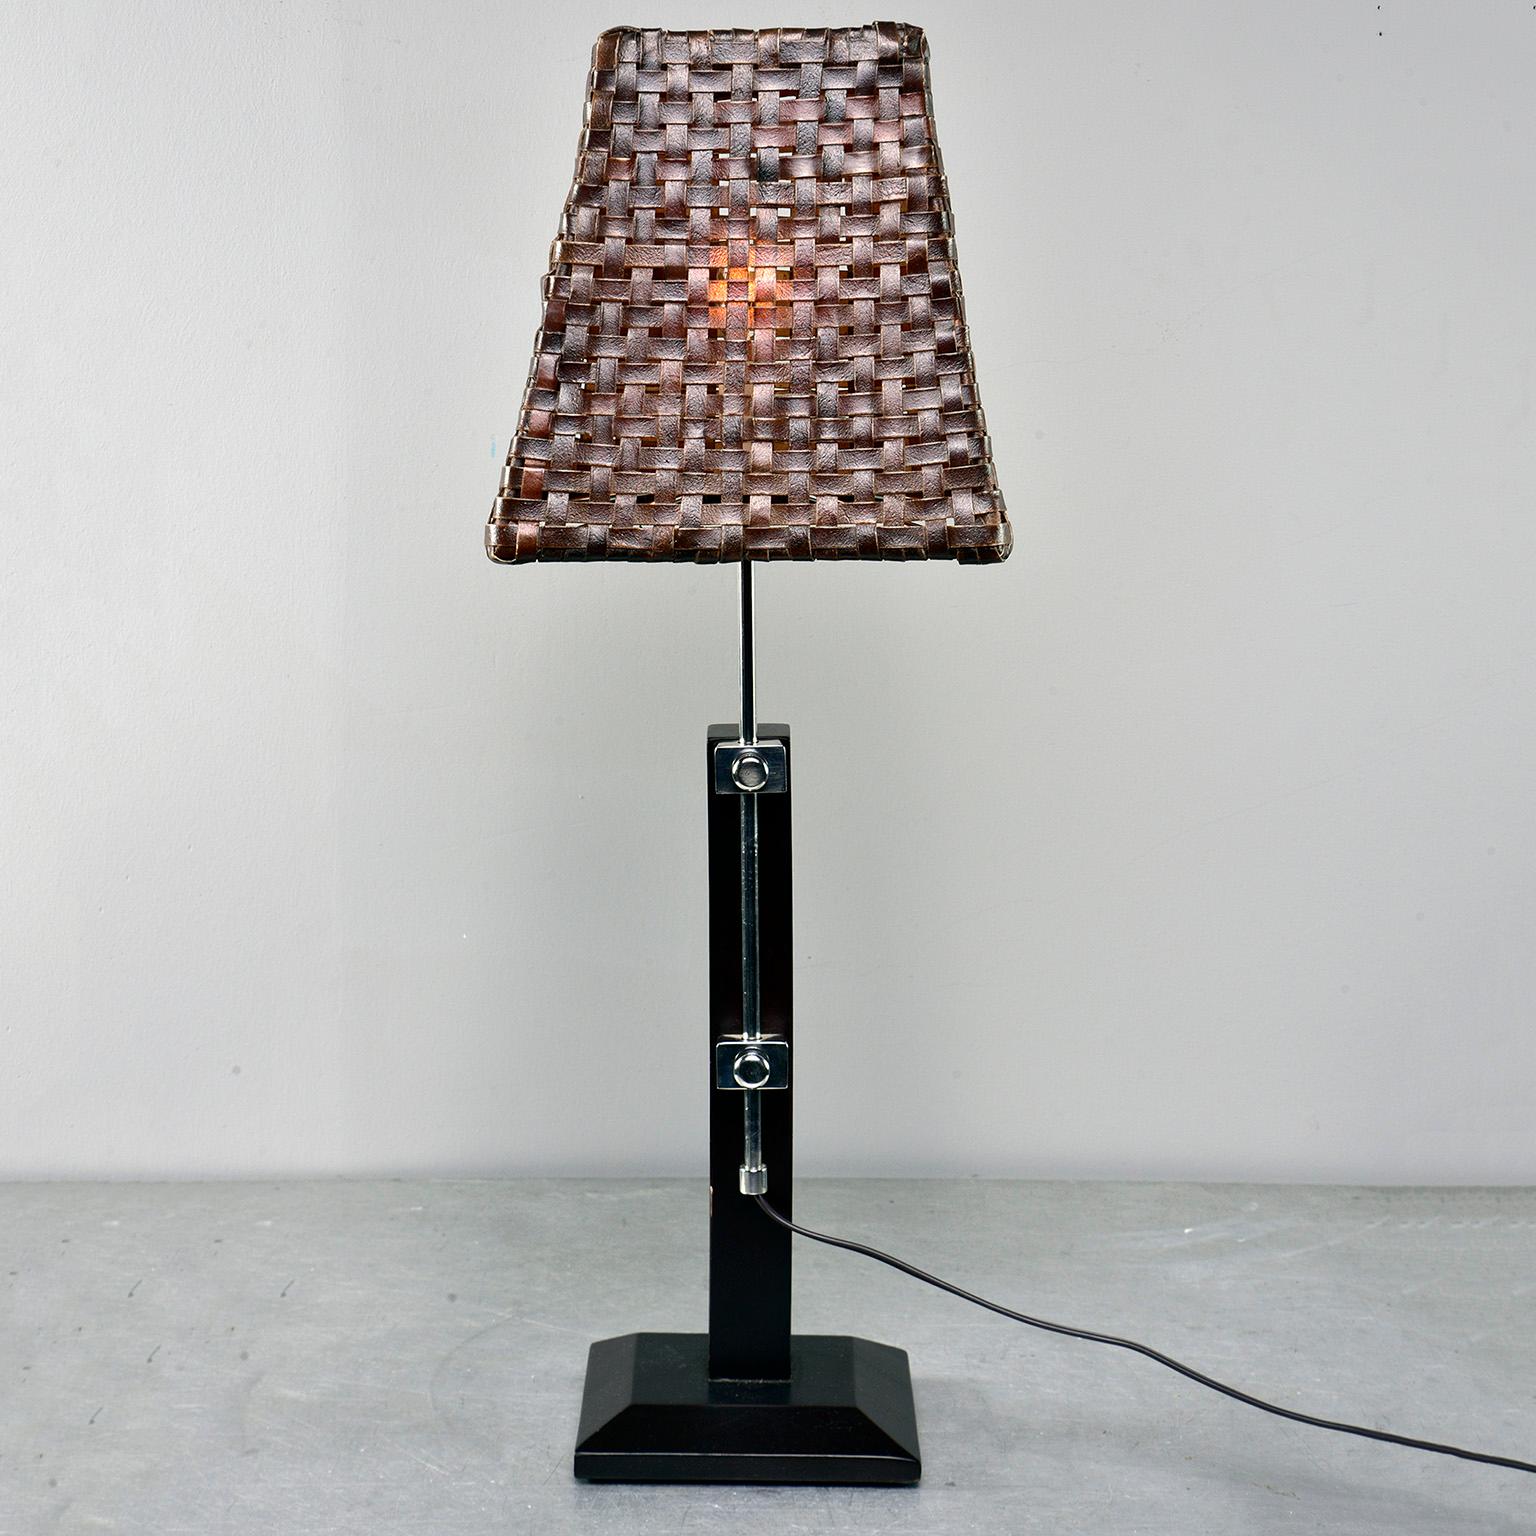 20th Century Midcentury Italian Adjustable Lamp with Original Woven Leather Shade For Sale